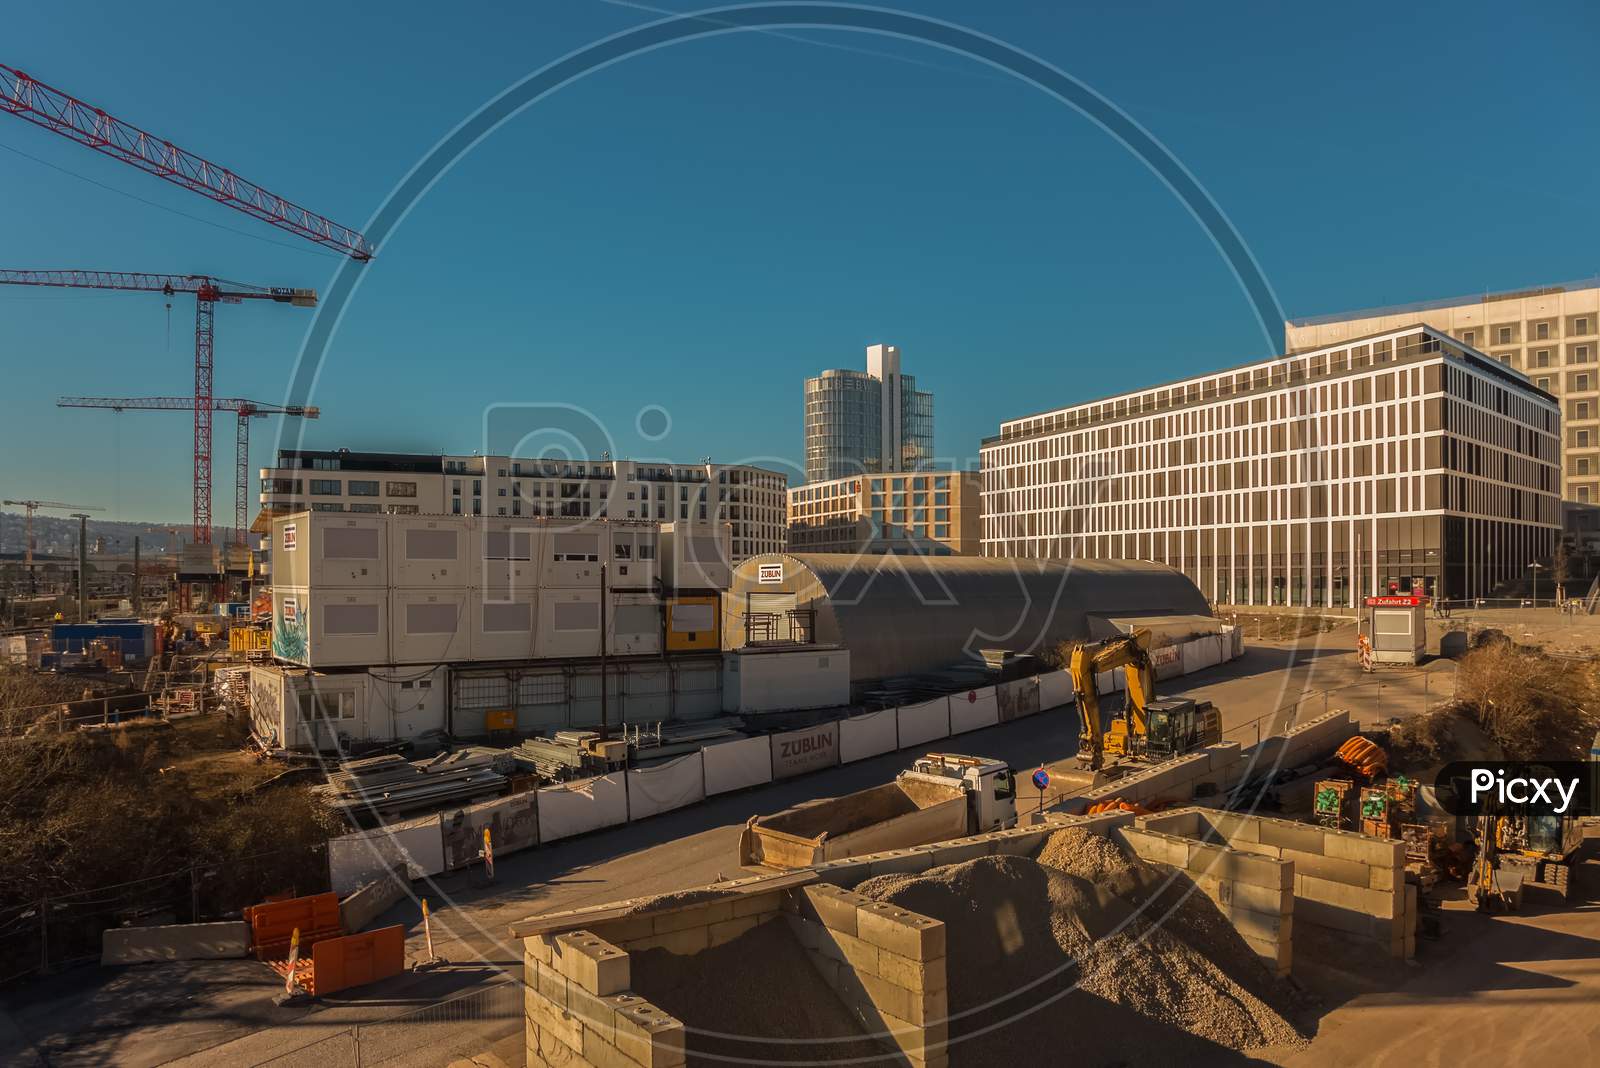 Stuttgart,Germany - February 24,2019:Budapester Platz This Is A Construction Site In The Direction To The Main Station.It Is Part Of The Infamous Project Stuttgart 21.